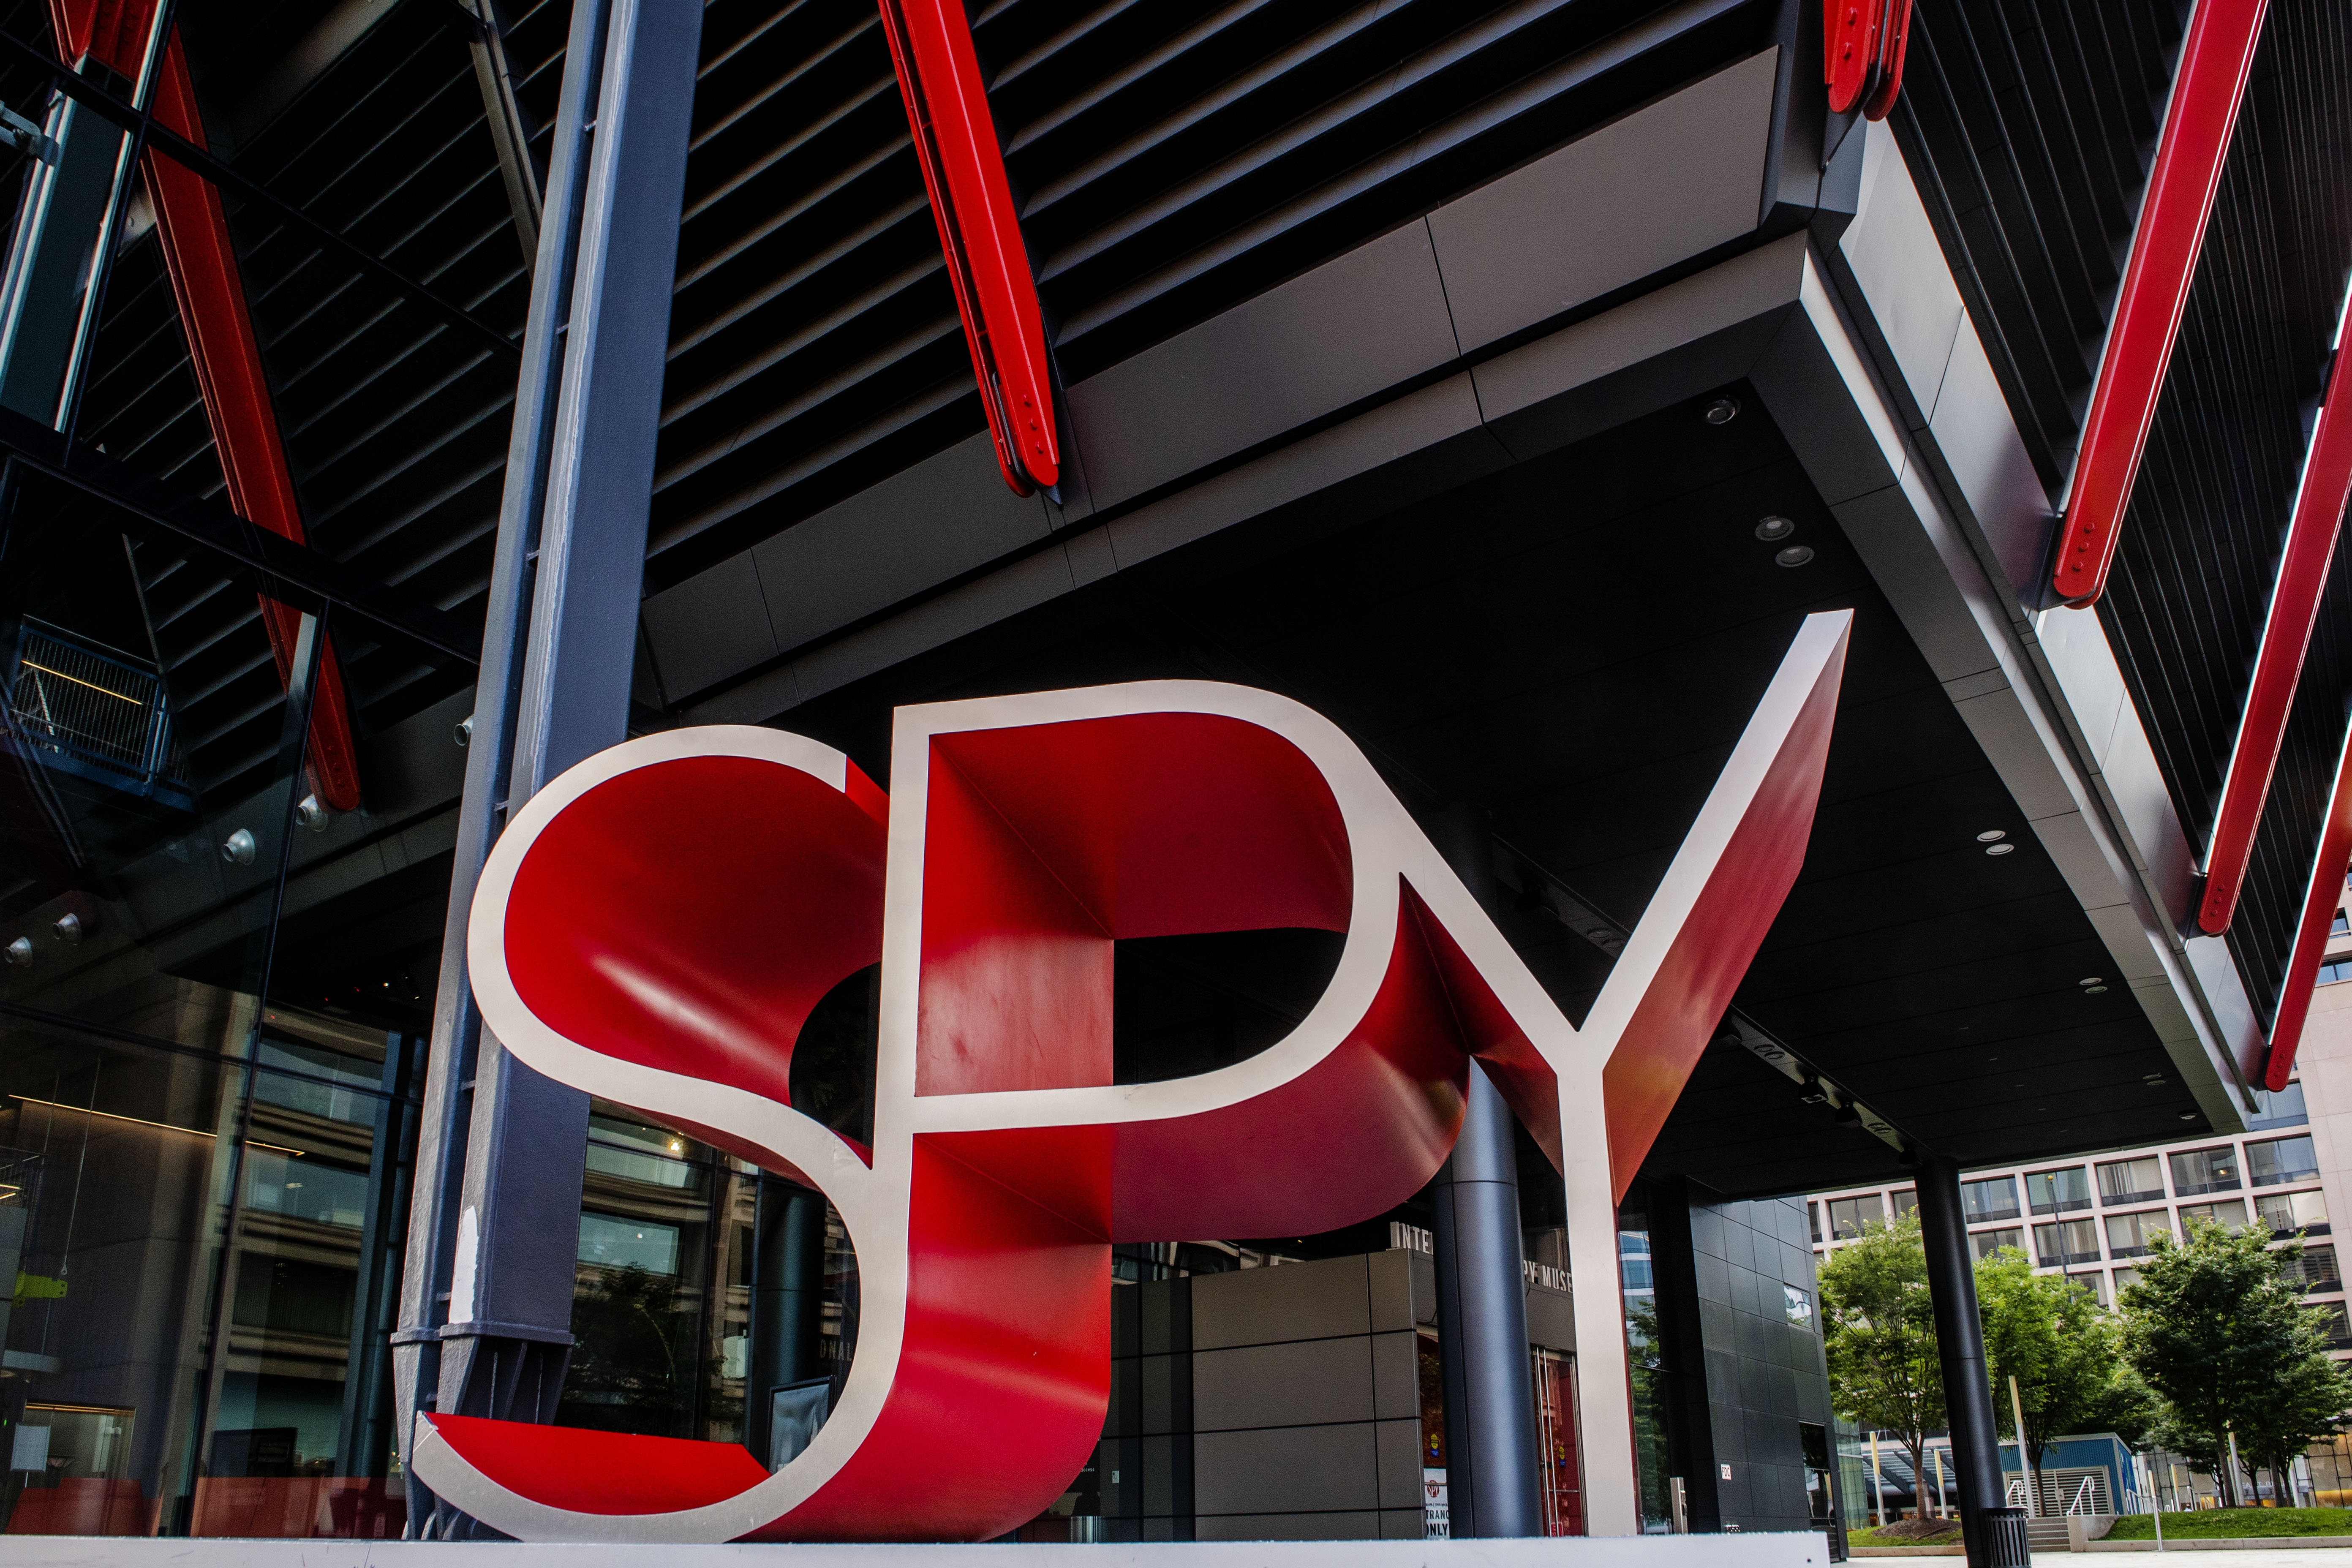 A visit to the Spy Museum for its upcoming 20th anniversary on June 24 in Washington, DC.